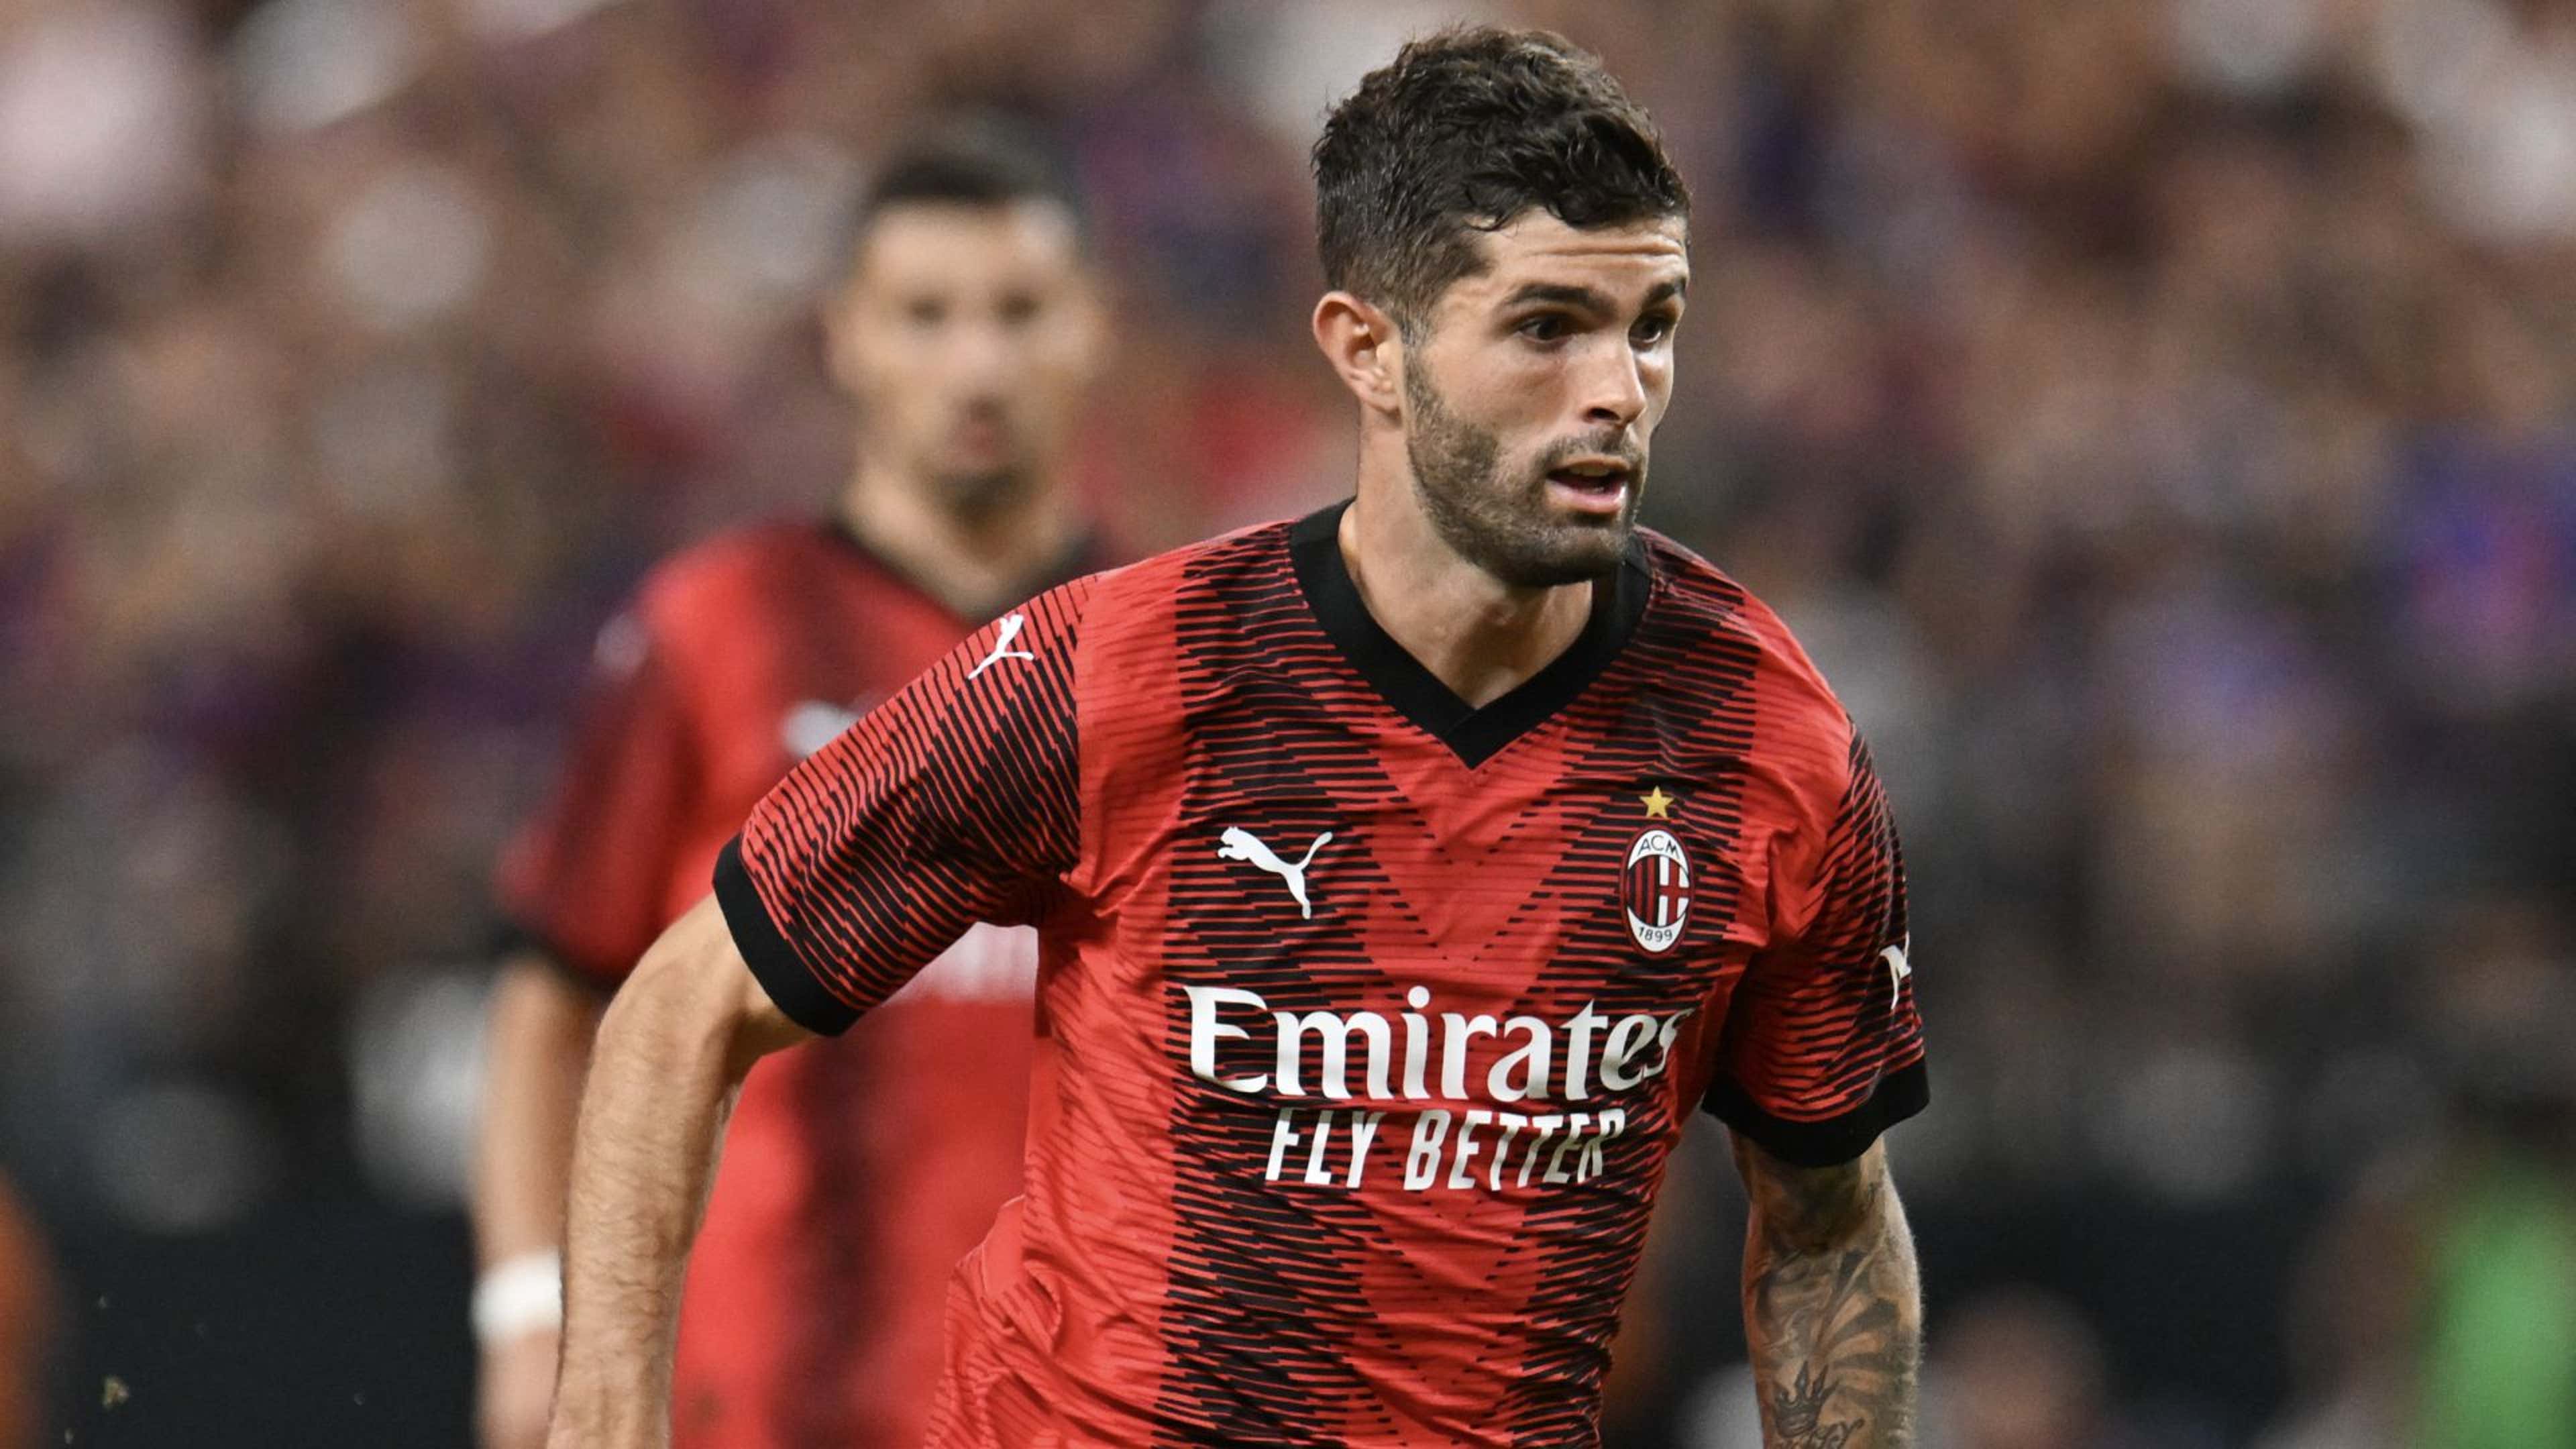 He is extraordinary!' - AC Milan signed Christian Pulisic because they  'needed' him, says CEO Giorgio Furlani | Goal.com